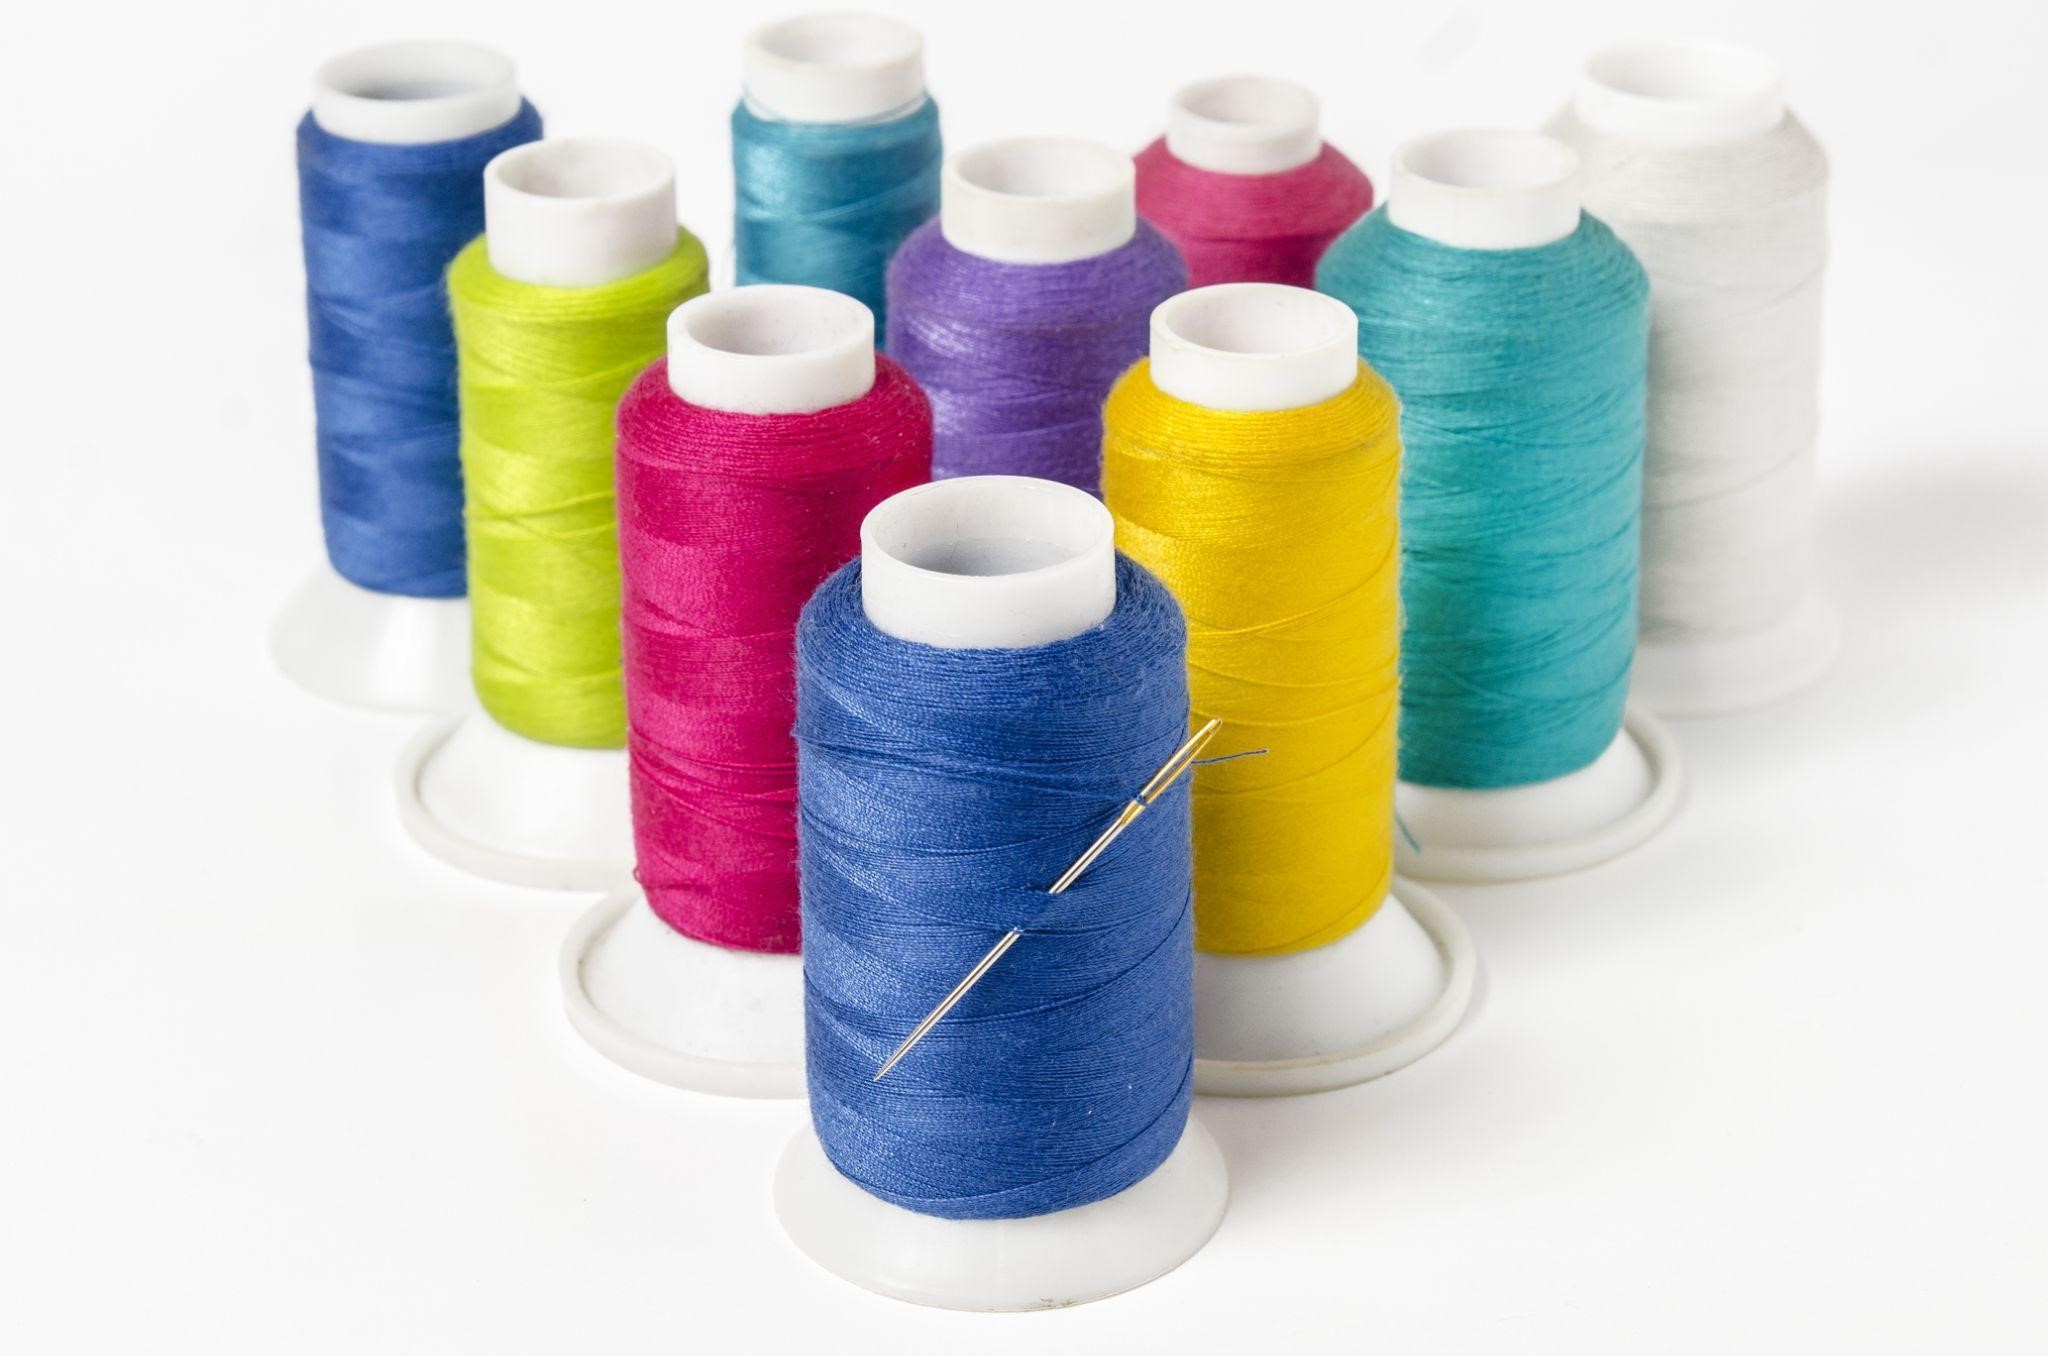 What is the Best Thread to Use for Sewing?